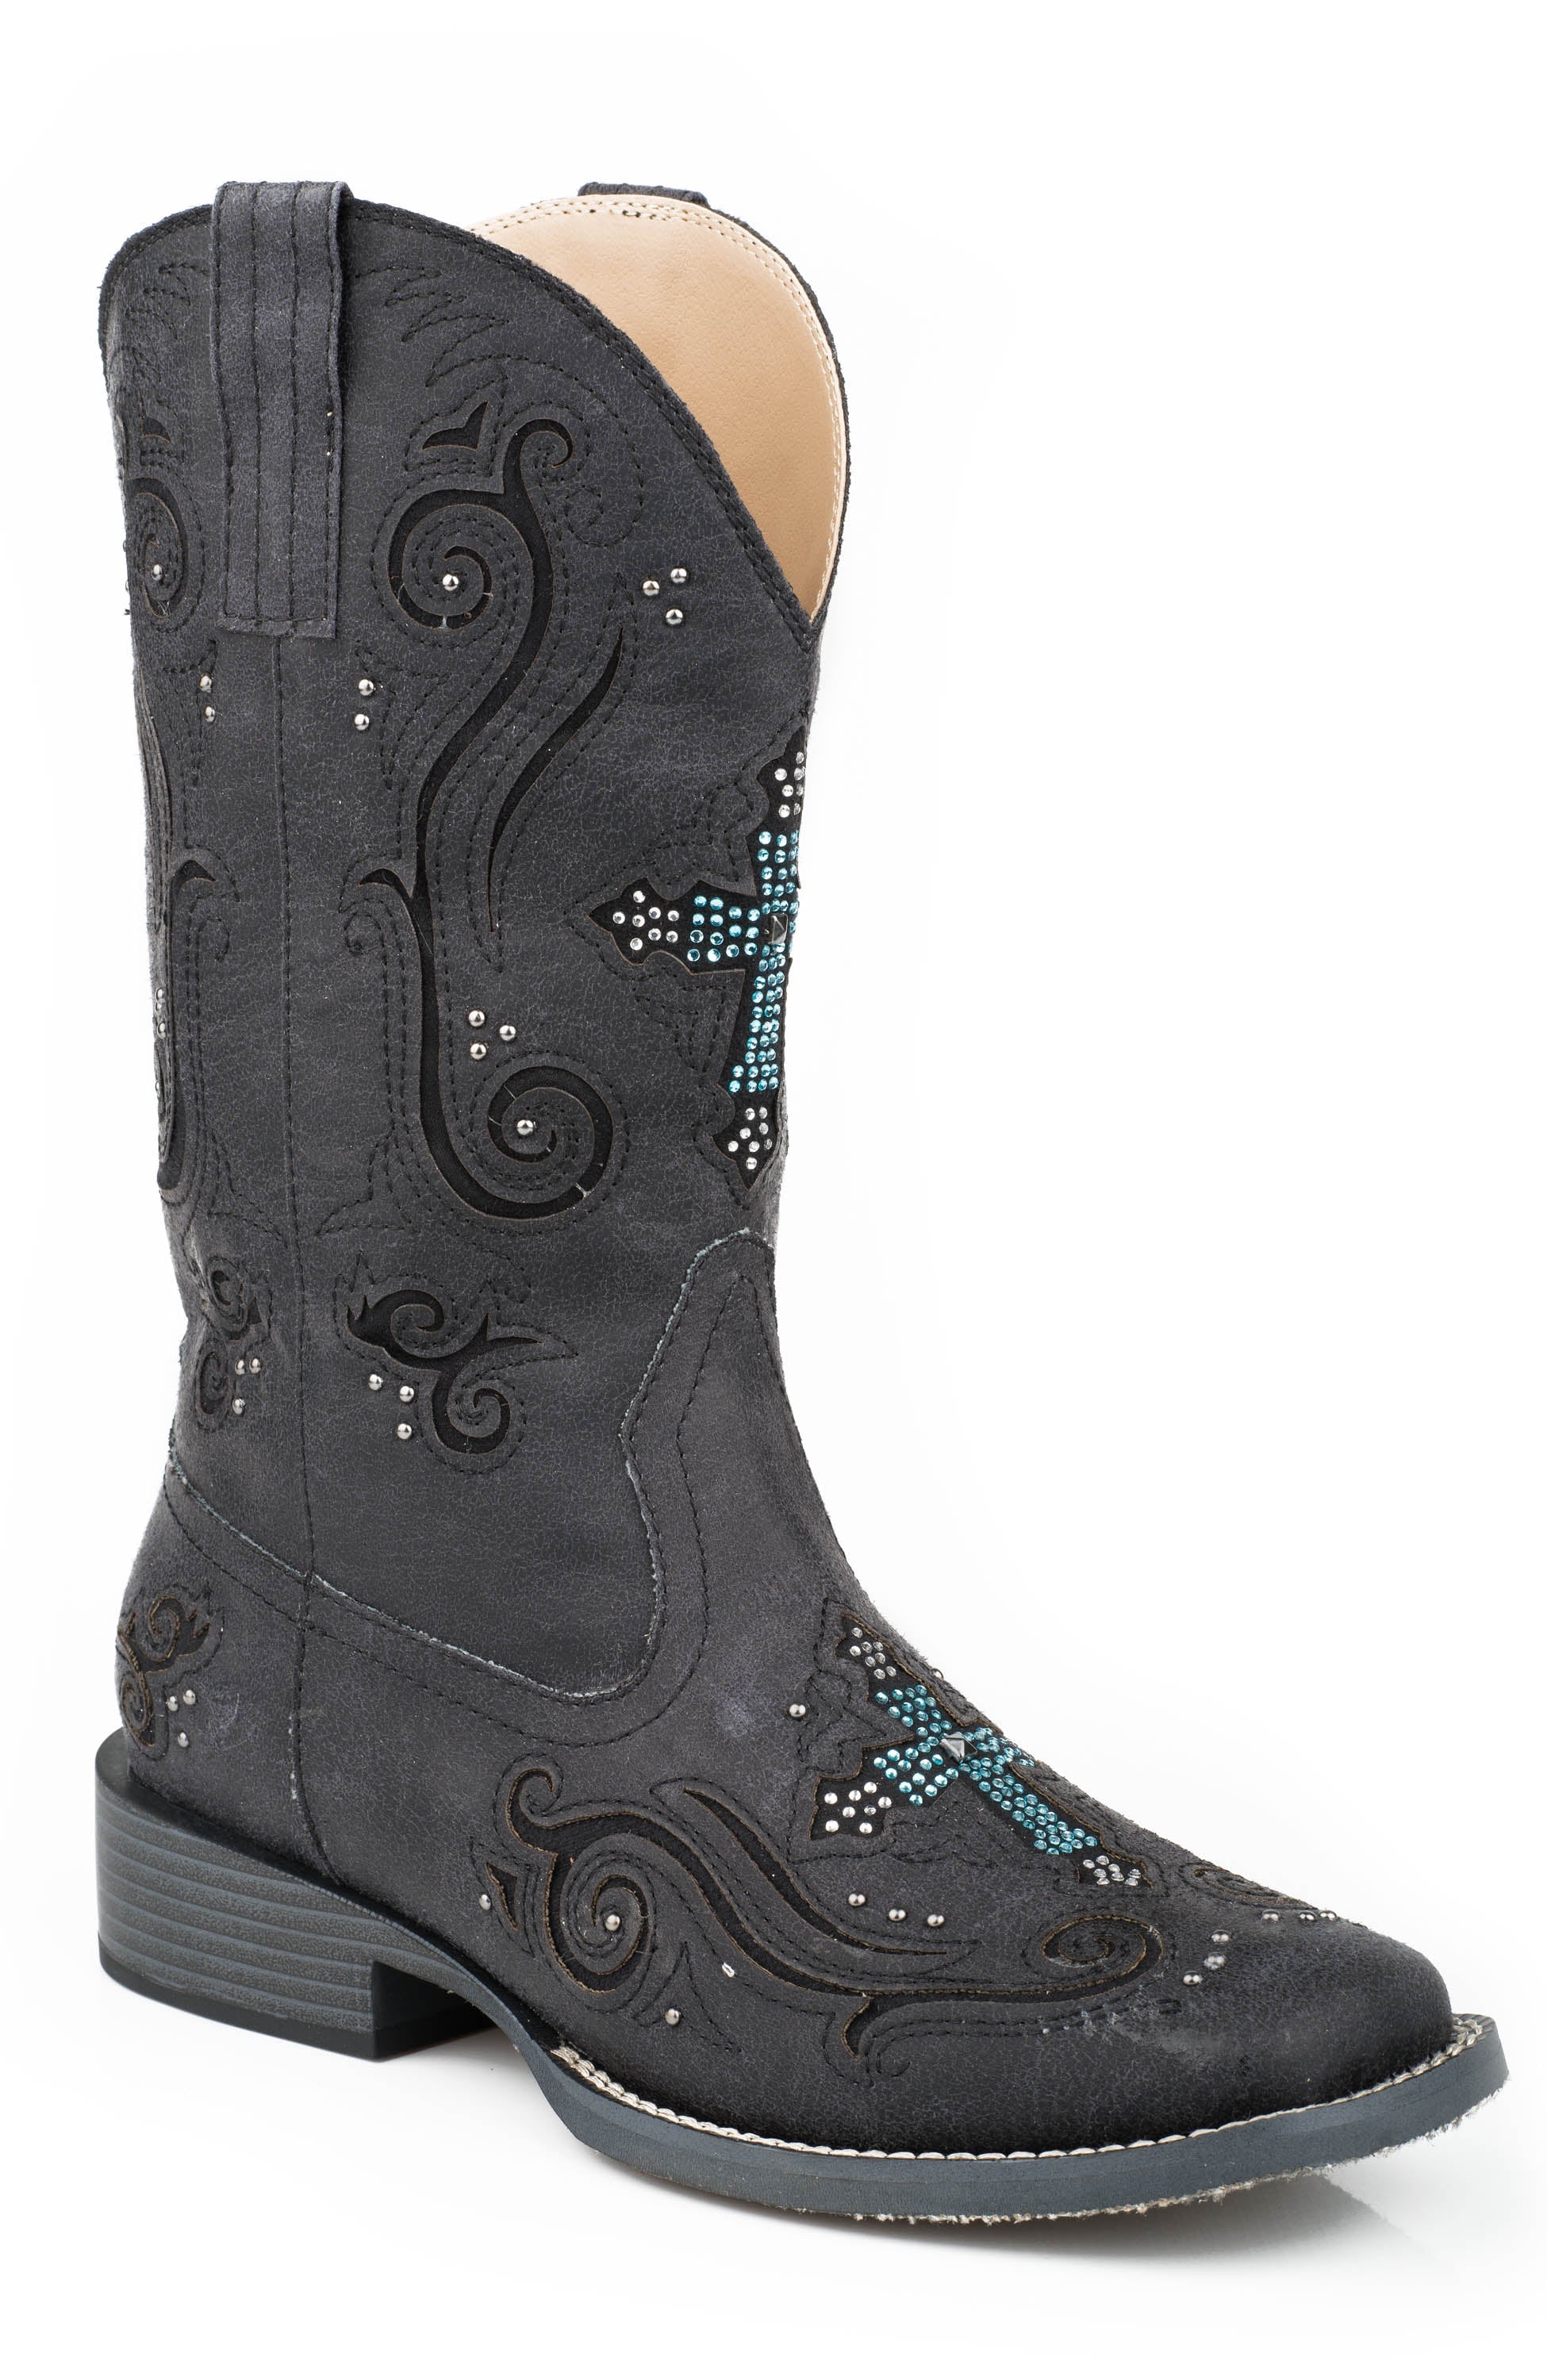 Roper Womens Cowboy Boot Vintage Black Faux Leather With Crystal And Cross Underlay Design